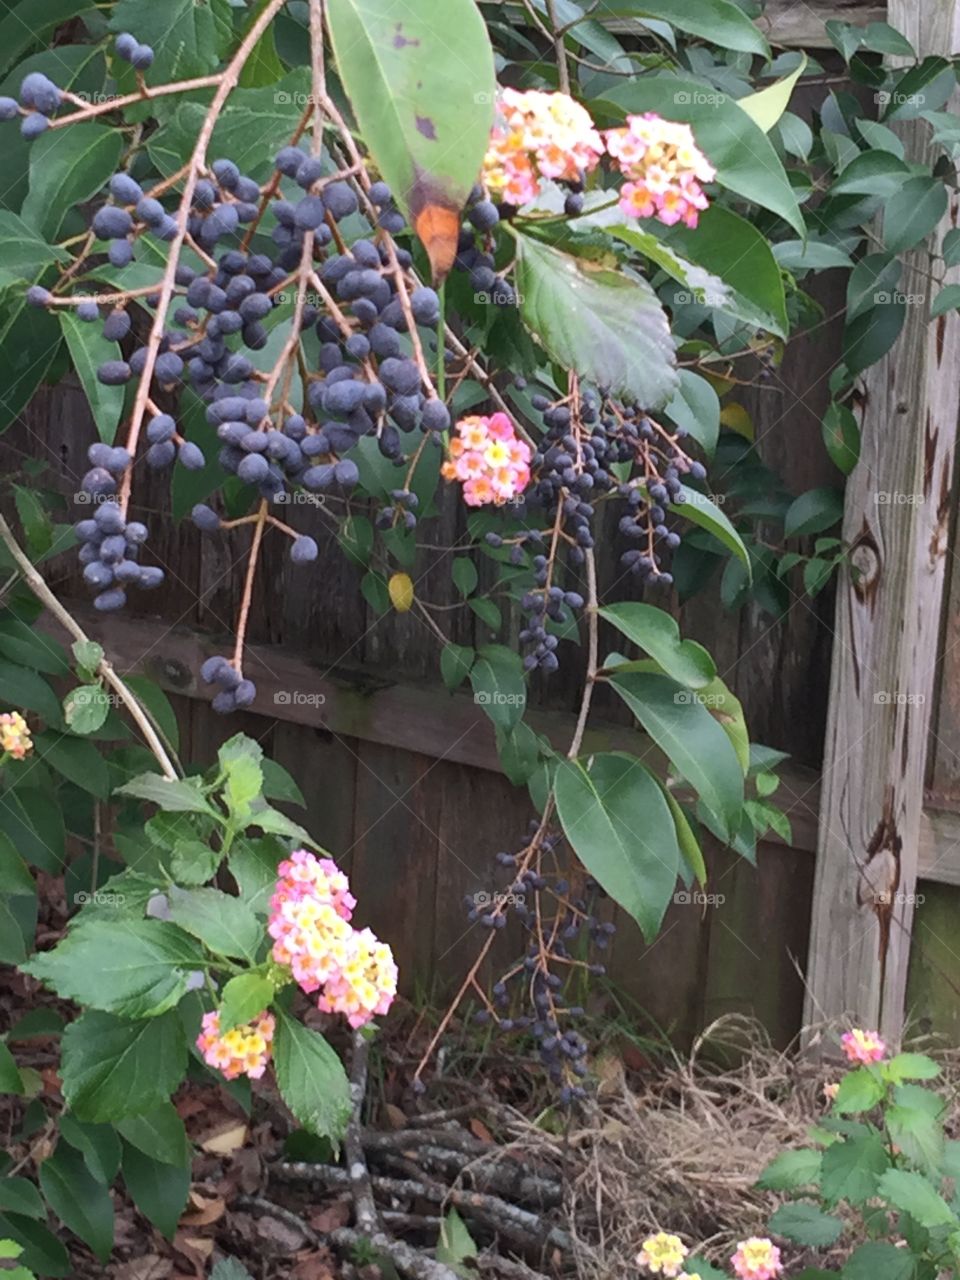 Fall flowers and berries on shrubs